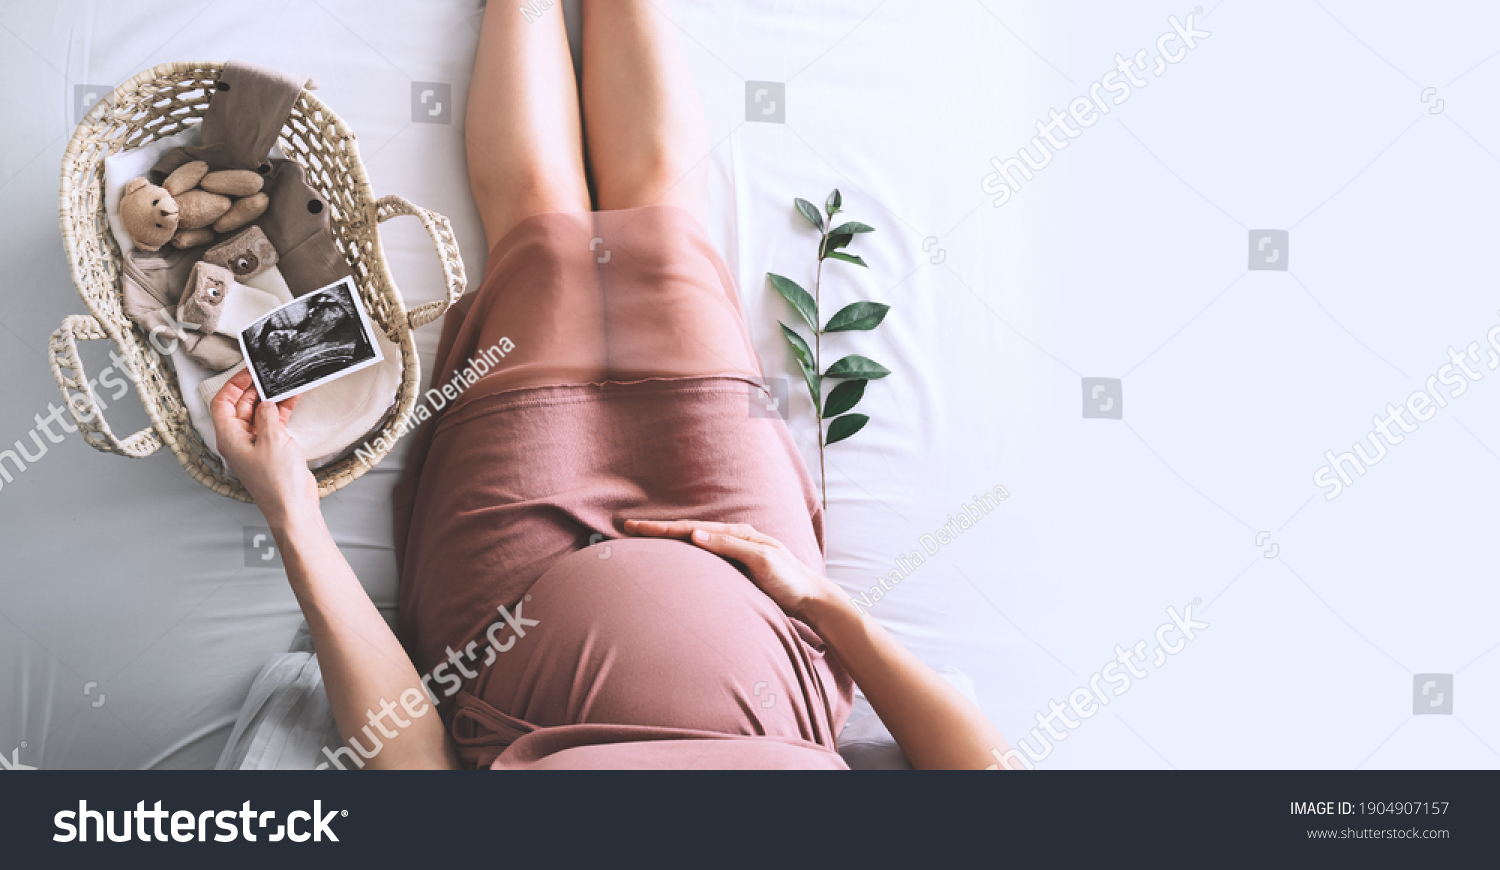 Pregnant woman in dress with ultrasound image. Mother with wicker basket of cute tiny stuff and teddy bear toy for newborn. Expectant mother waiting and preparing for baby birth during pregnancy. #1904907157